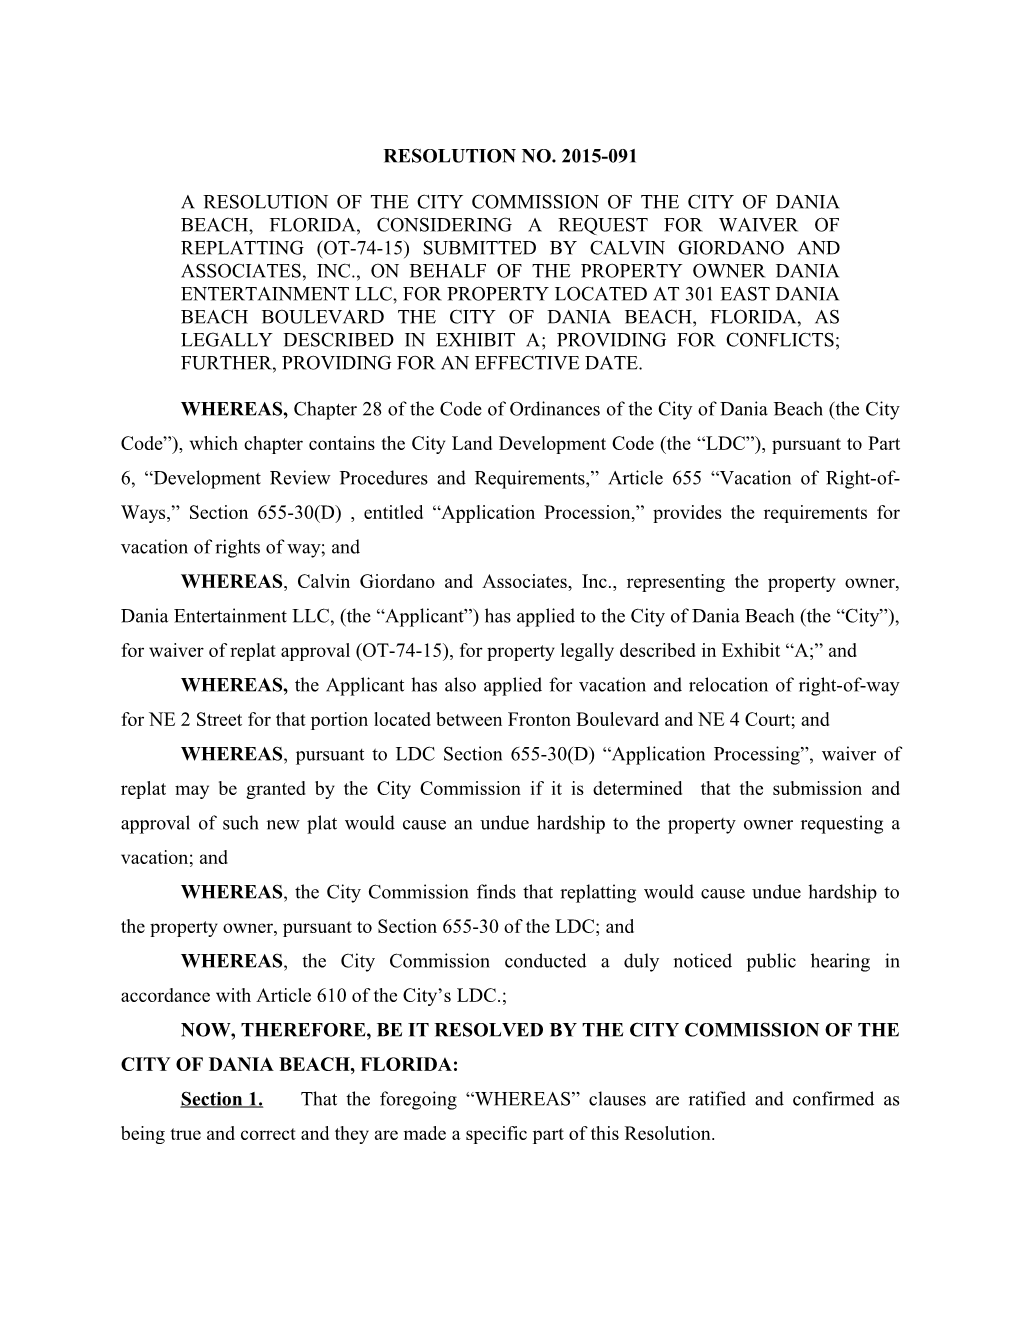 A Resolution of the City Commission of the City of Dania Beach, Florida, Considering A